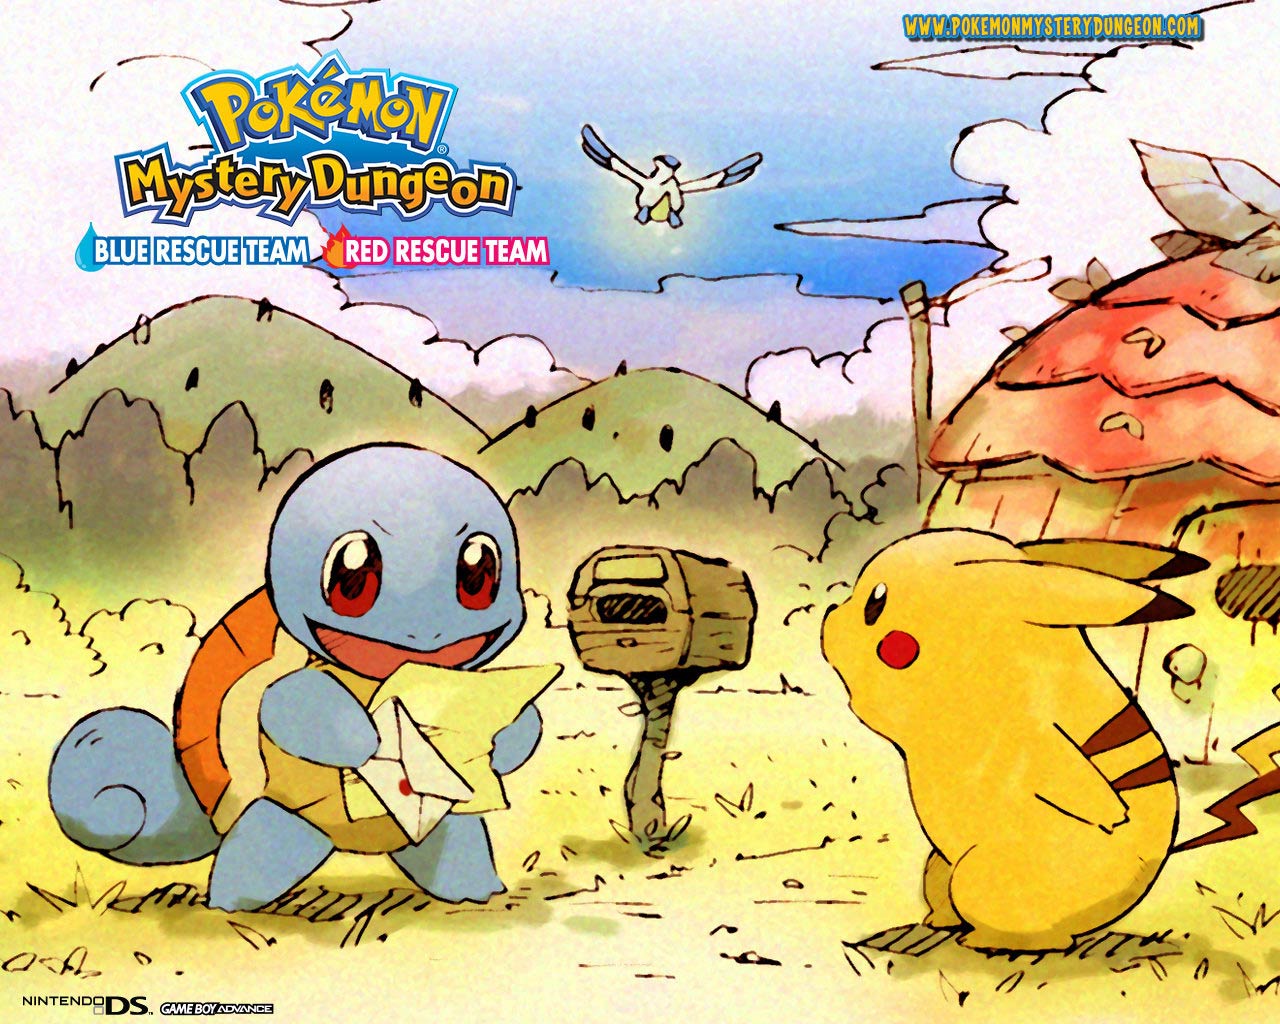 Squirtle And Pikachu Pokemon Wallpaper - Pokemon Mystery Dungeon Art - HD Wallpaper 